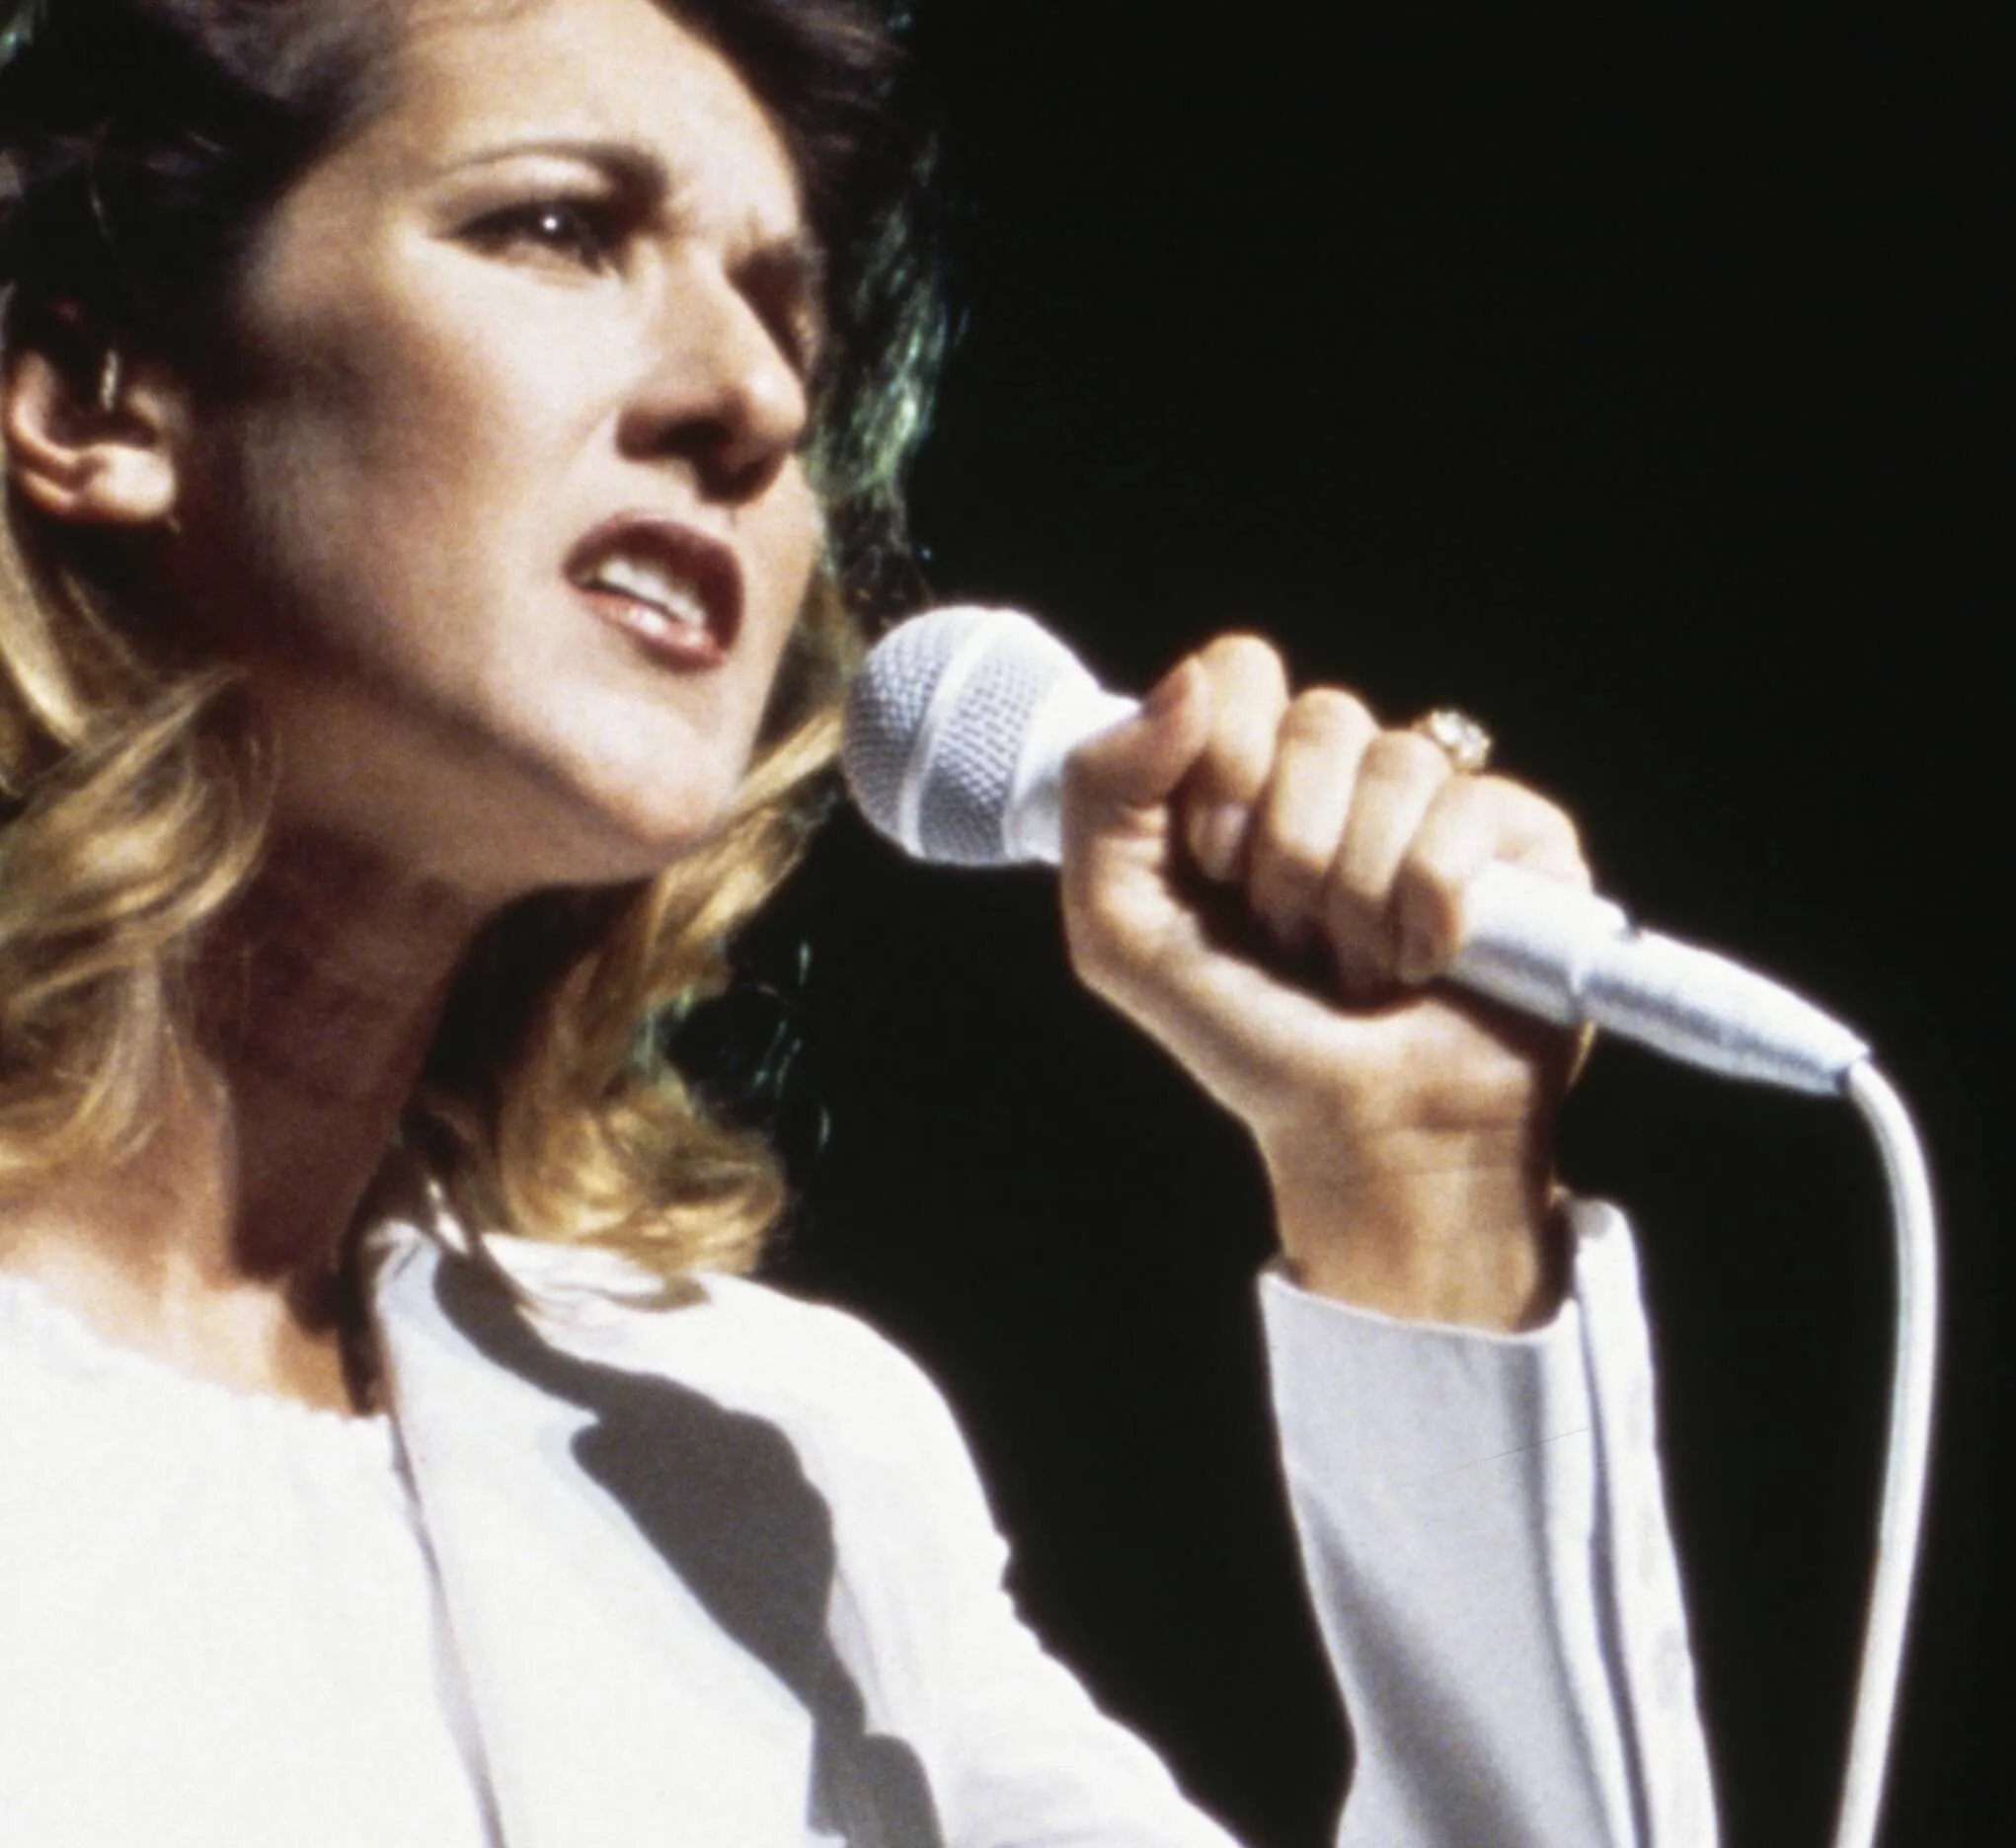 "Because You Loved Me' singer Celine Dion with a microphone